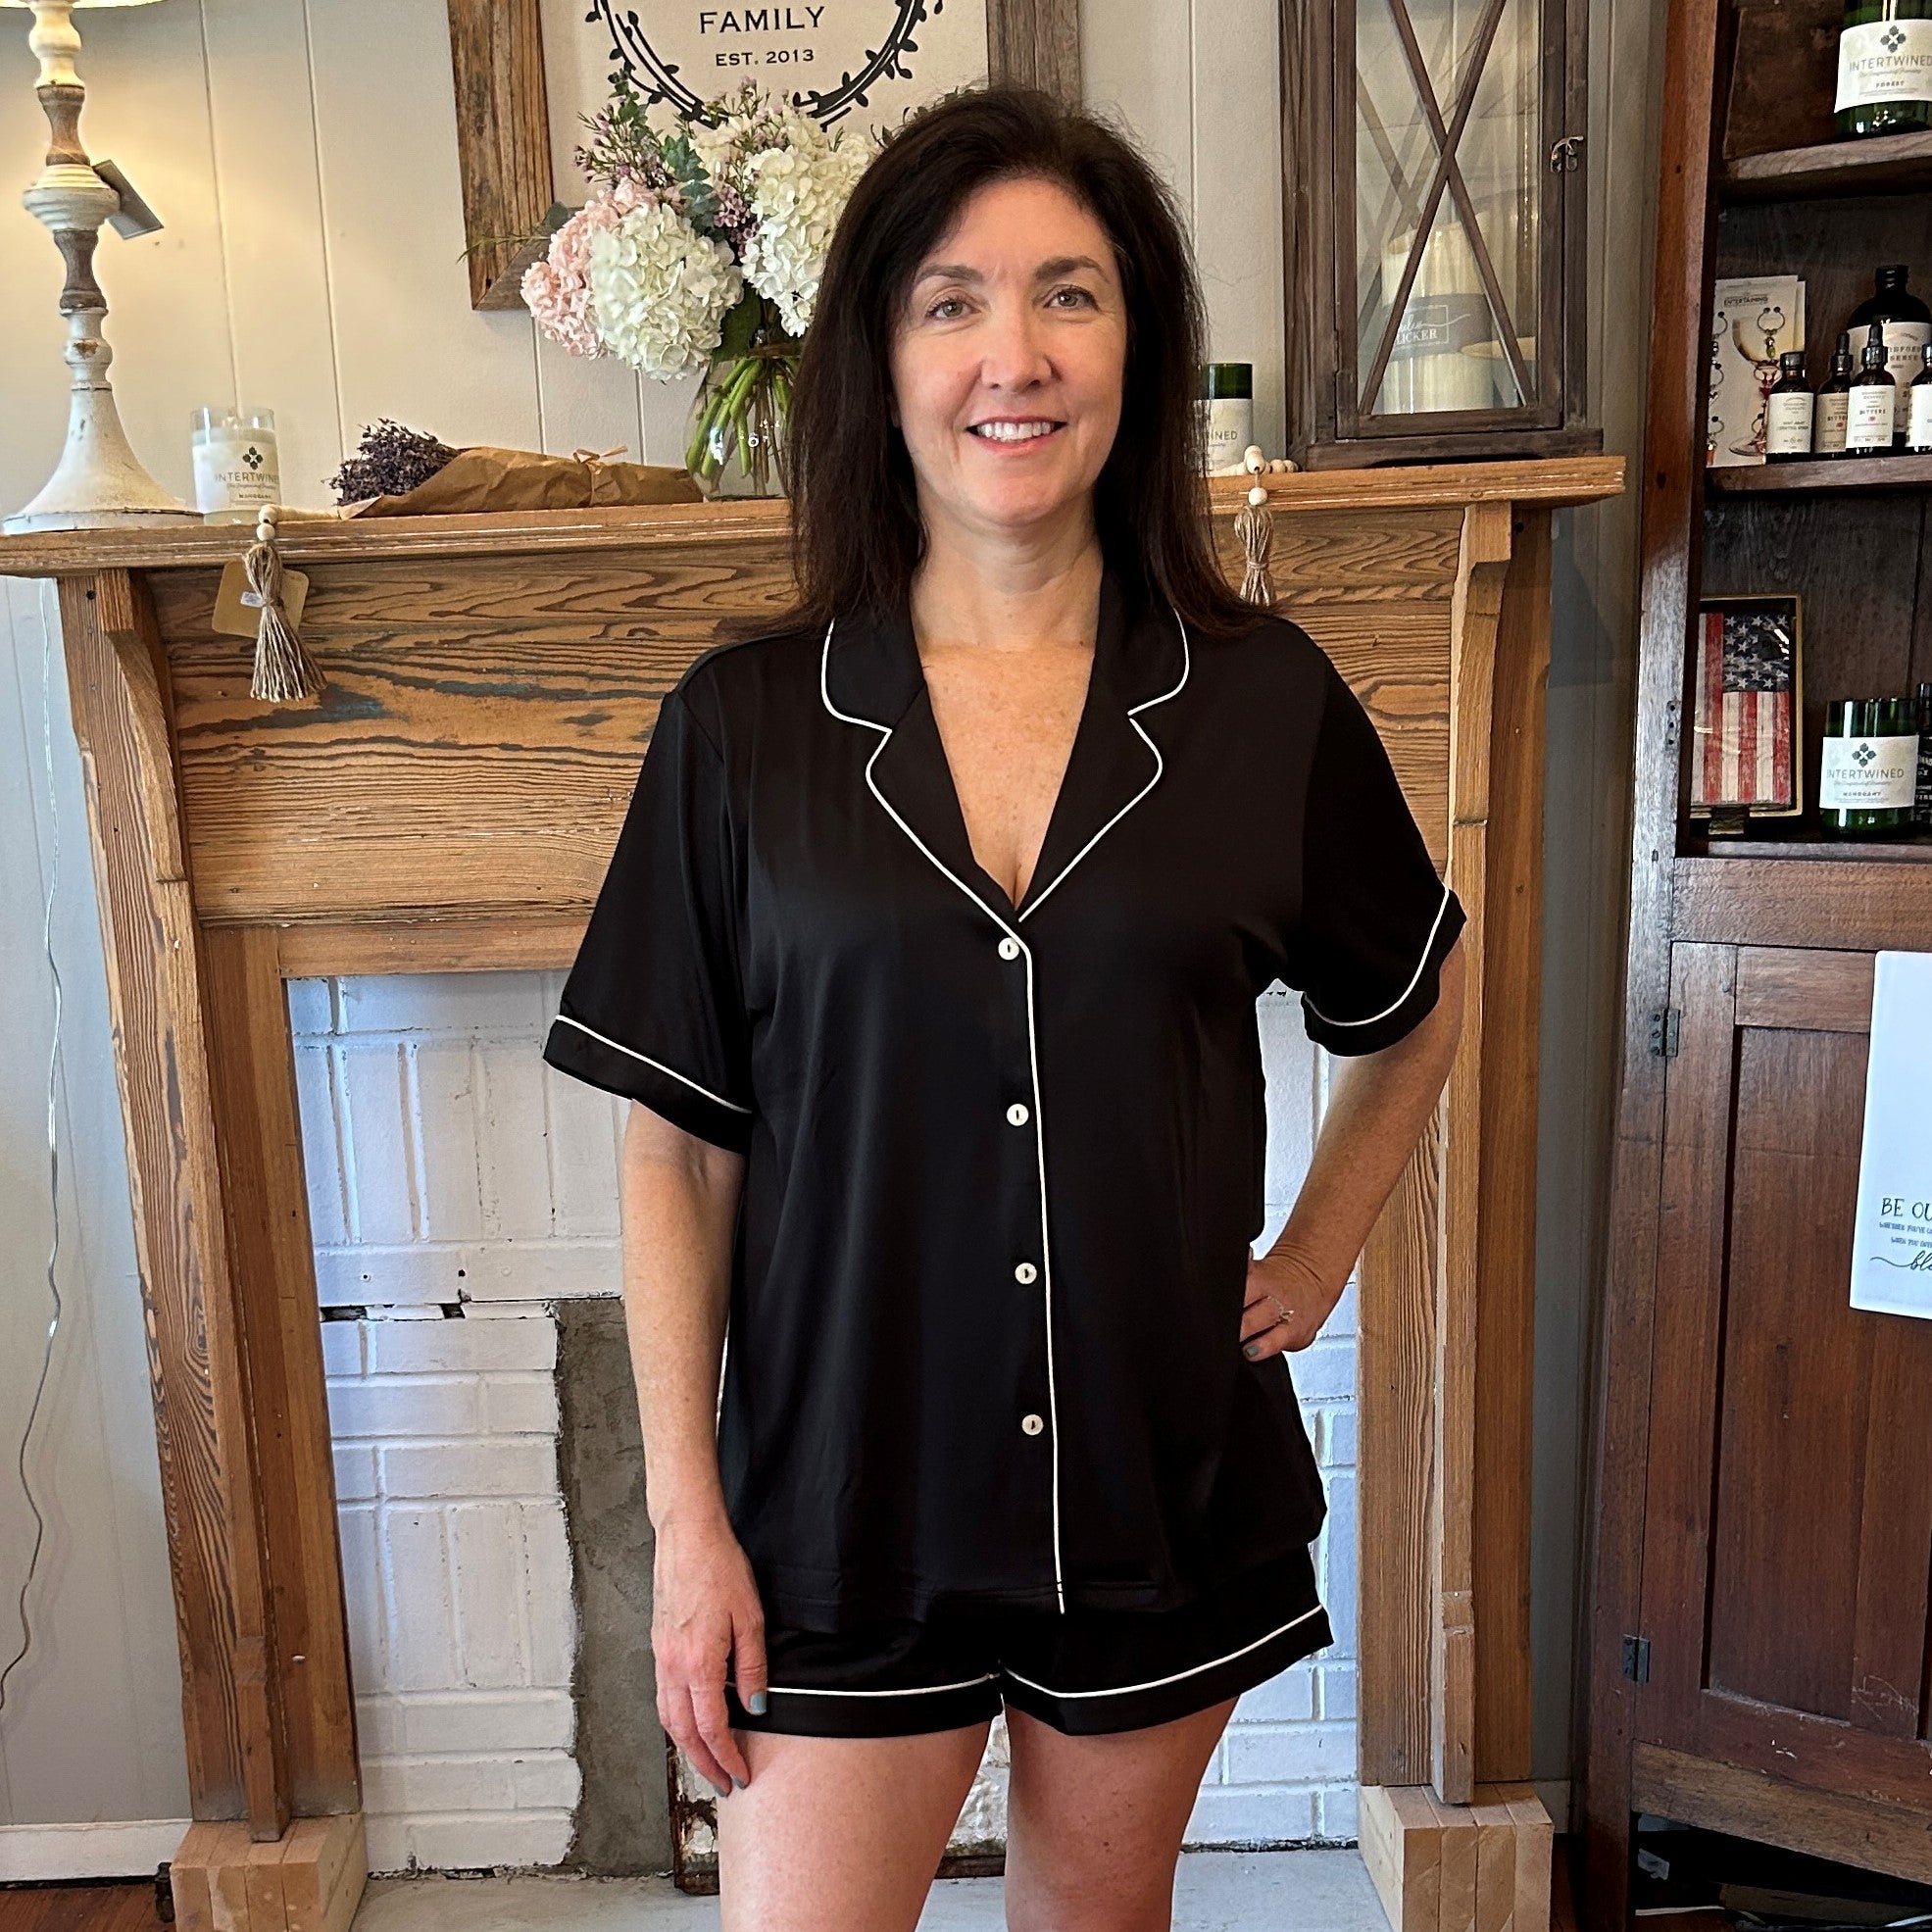 This Women's Knit Pajama Short Set offers luxurious comfort and convenience. Made with soft slinky jersey material, this set includes a matching button-up shirt and shorts with an elastic waistband and functioning drawstring for a custom fit. It has white piping for extra flare. Enjoy a comfortable night of rest in style.